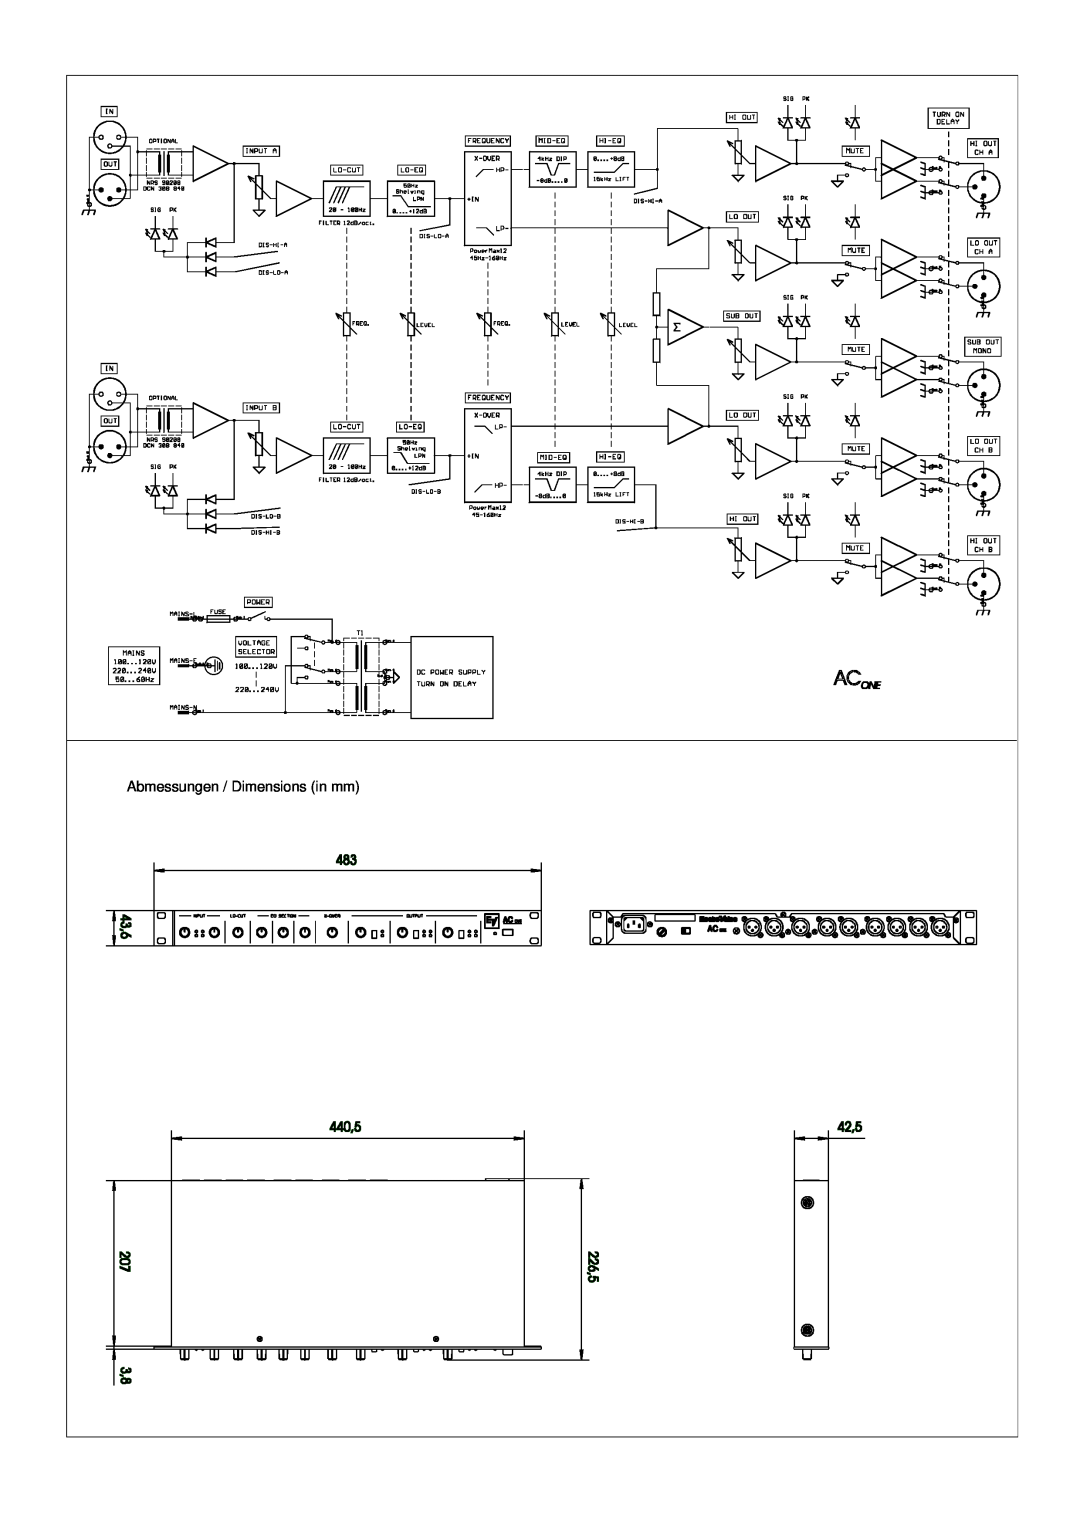 Electro-Voice Stereo System specifications Abmessungen / Dimensions in mm 